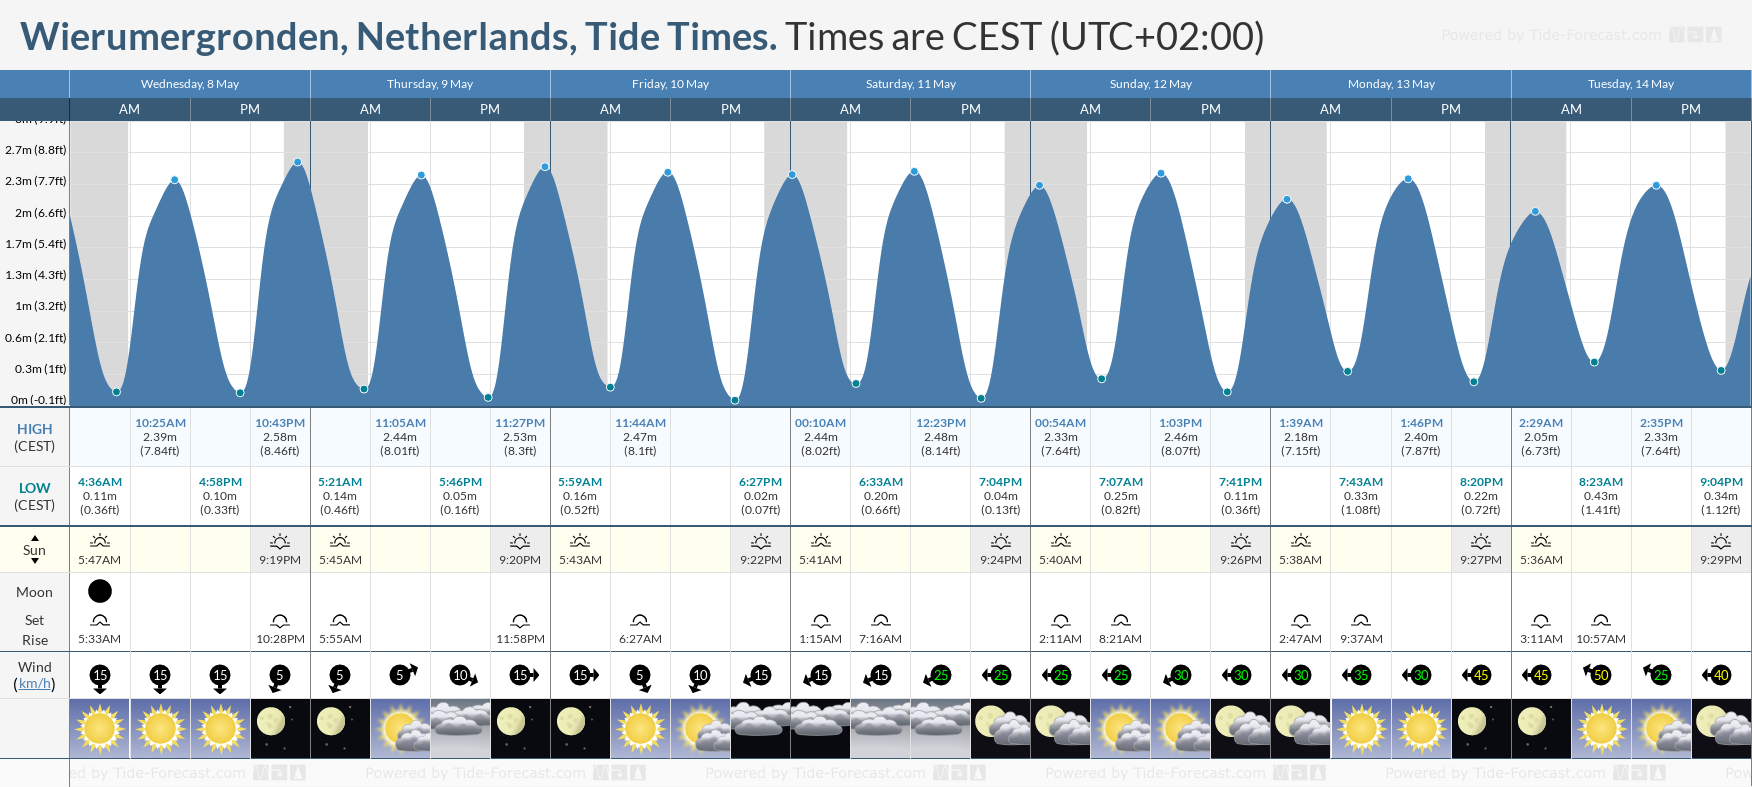 Wierumergronden, Netherlands Tide Chart including high and low tide times for the next 7 days